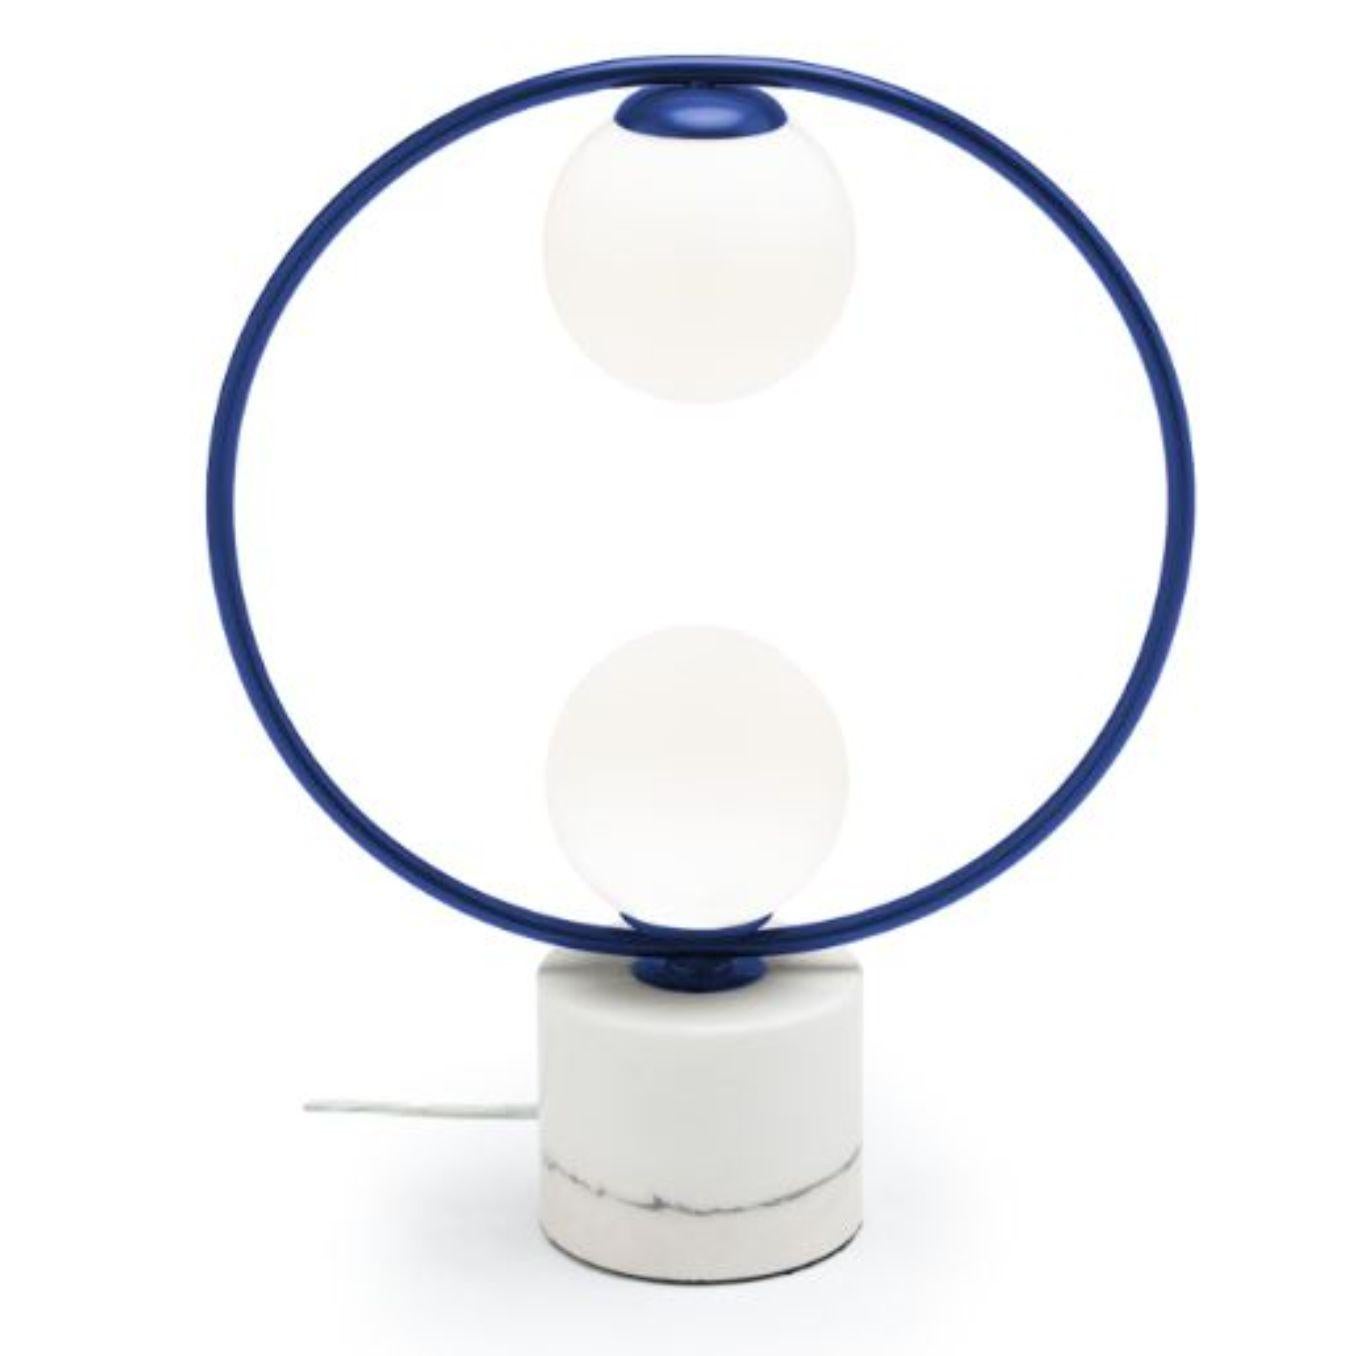 Cobalt Loop table II lamp with Marble Base by Dooq
Dimensions: W 43 x D 15 x H 53 cm
Materials: lacquered metal, polished or brushed metal, marble.
Also available in different colors and materials. 

Information:
230V/50Hz
2 x max. G9
4W